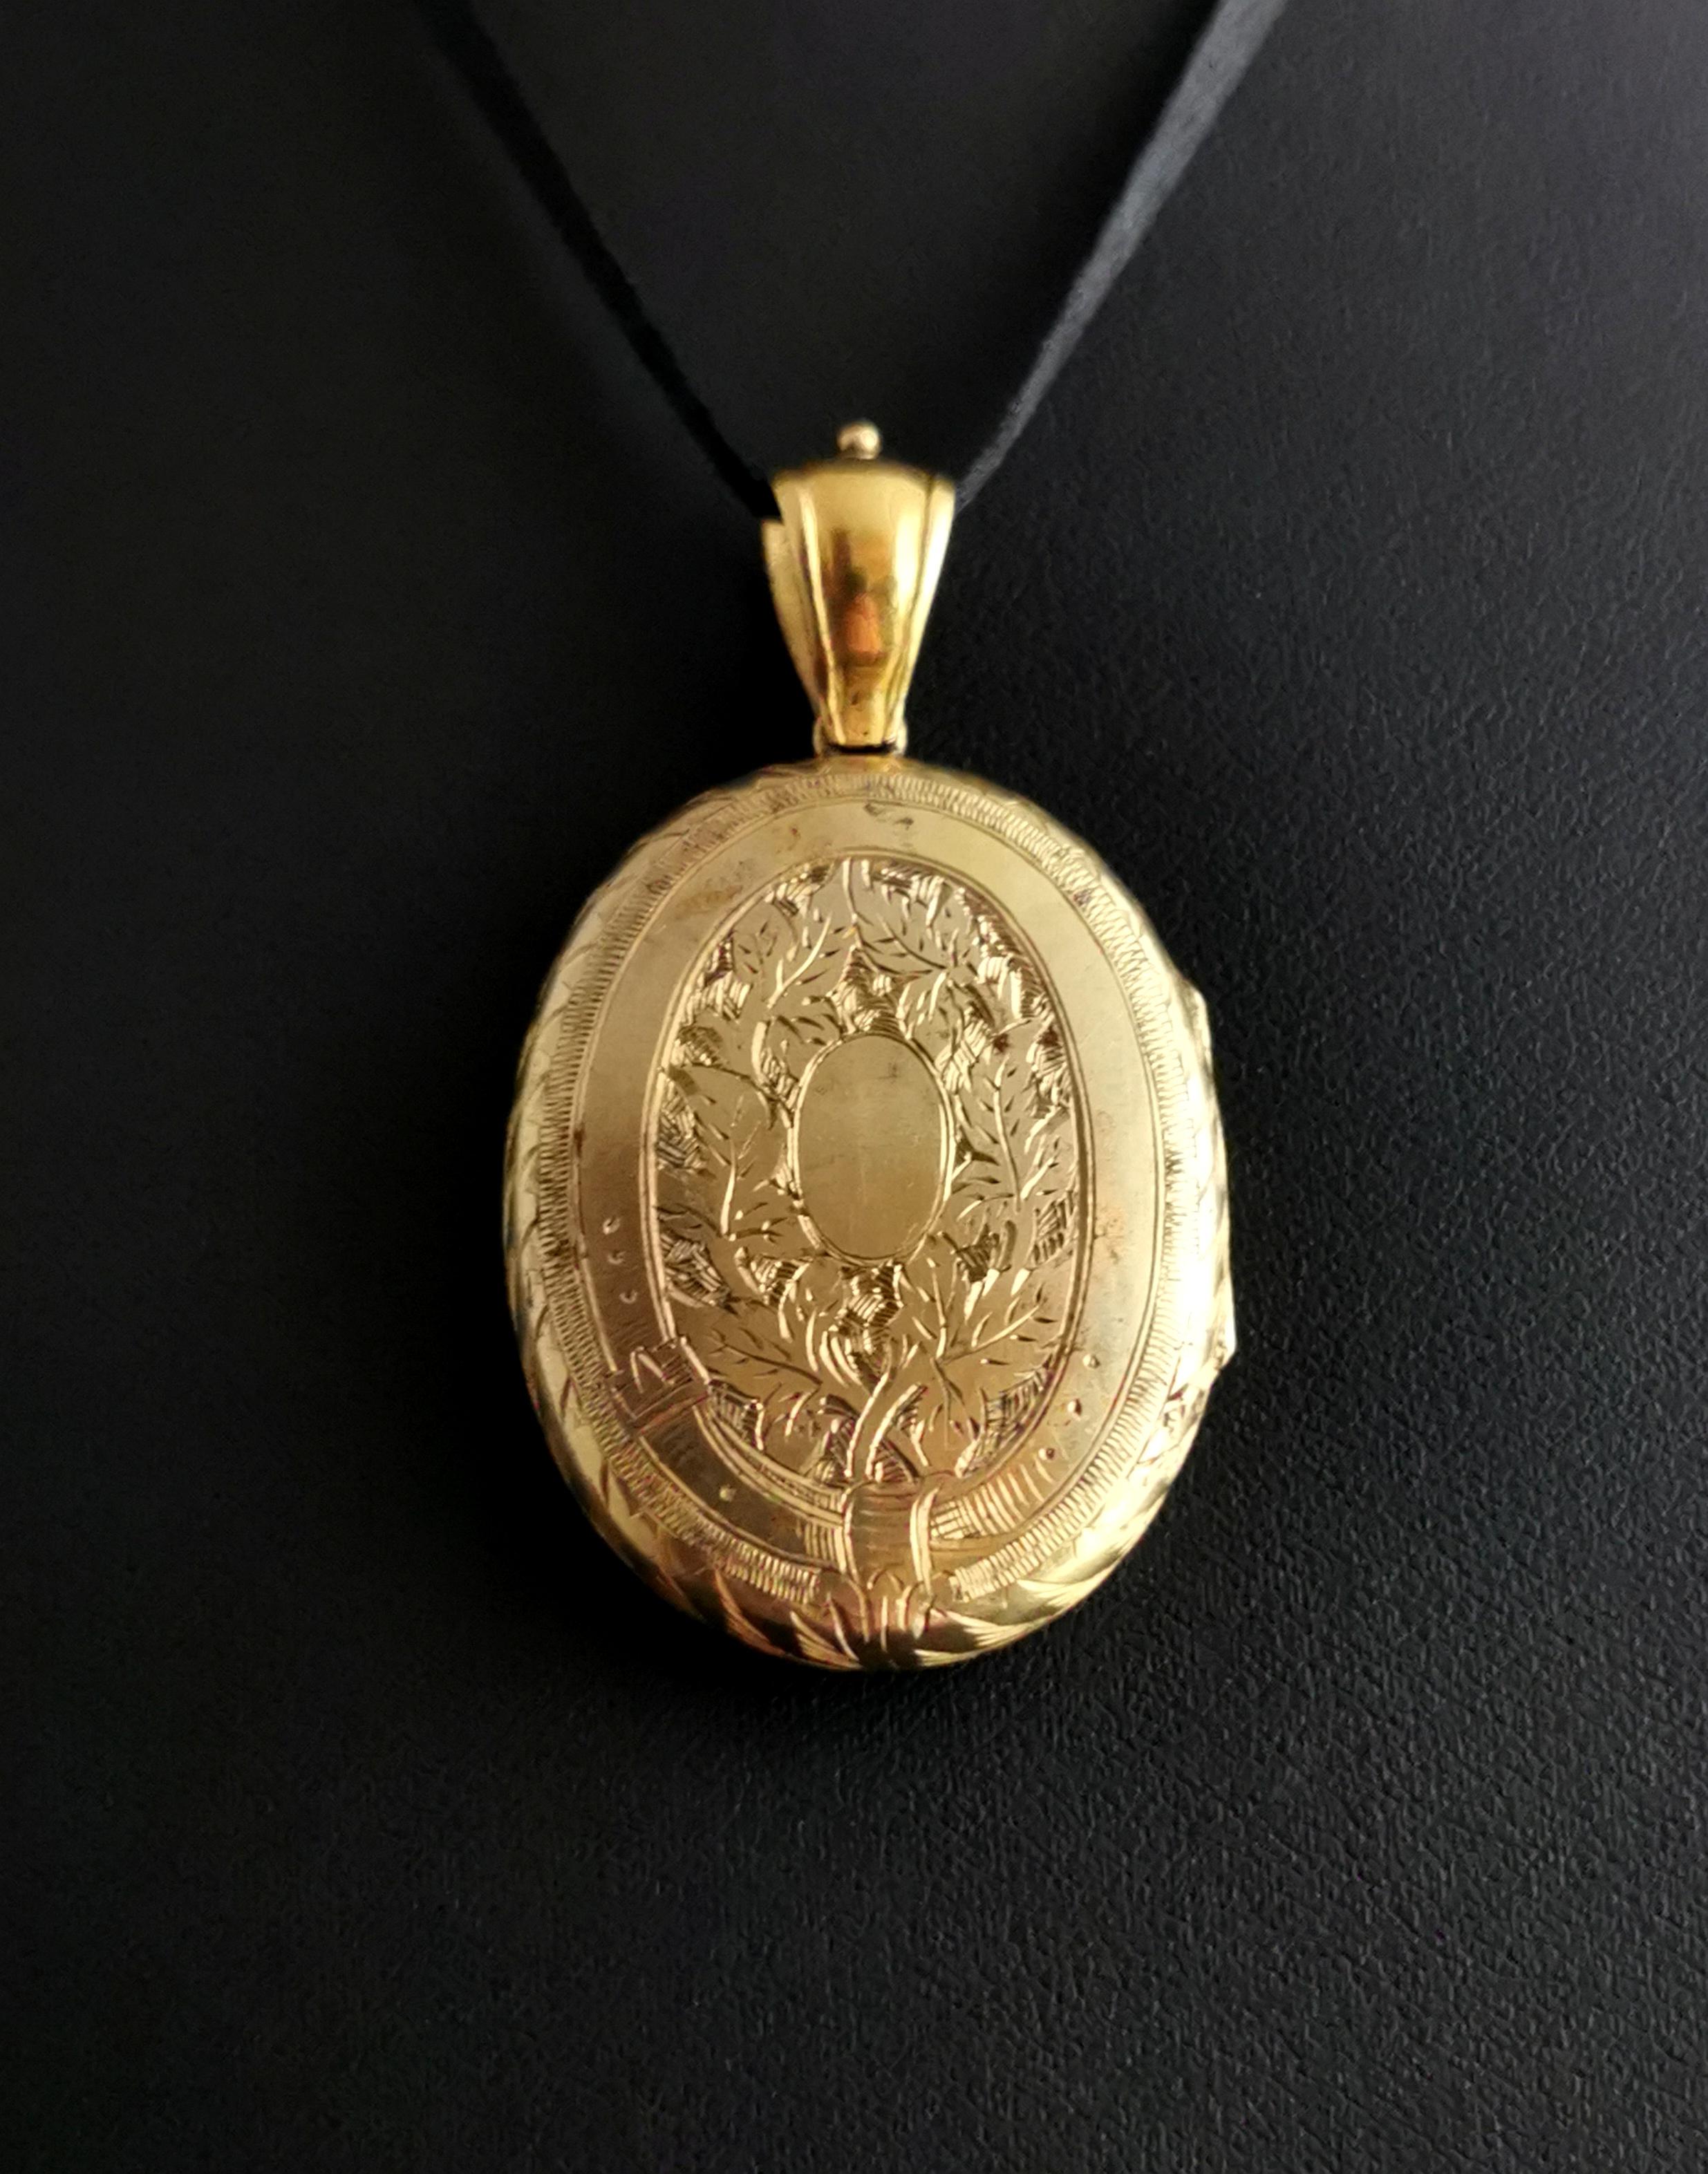 A stunning antique, Victorian silver gilt locket.

A large sized locket with an integral bale.

The locket features a garter belt on one side with a leaf engraving to the centre along with a small blank oval cartouche which has not been engraved so